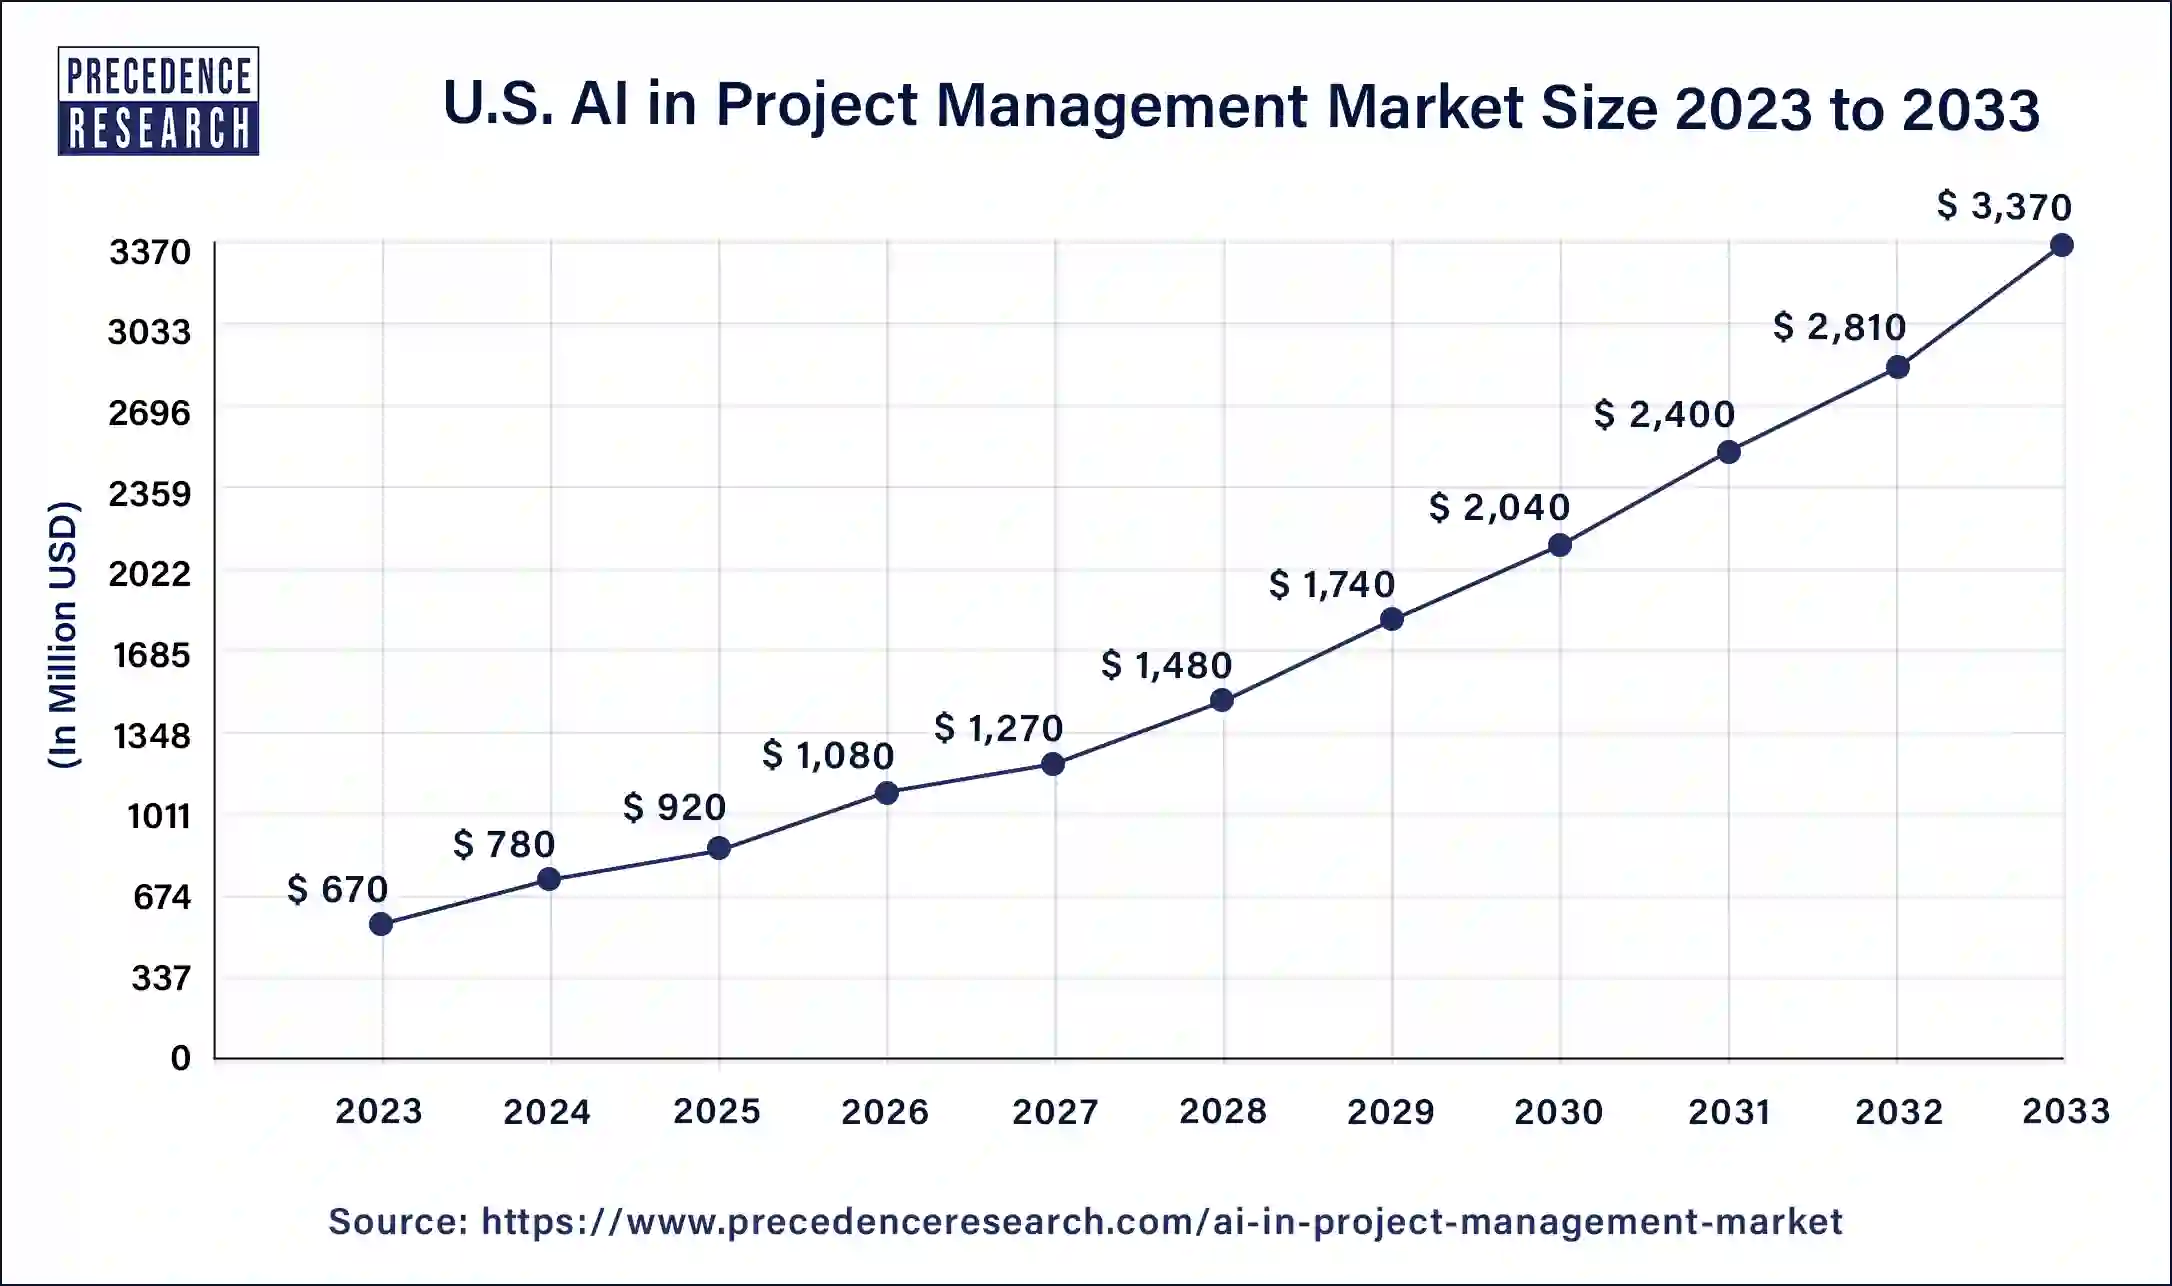 U.S. AI in Project Management Market Size 2024 to 2033